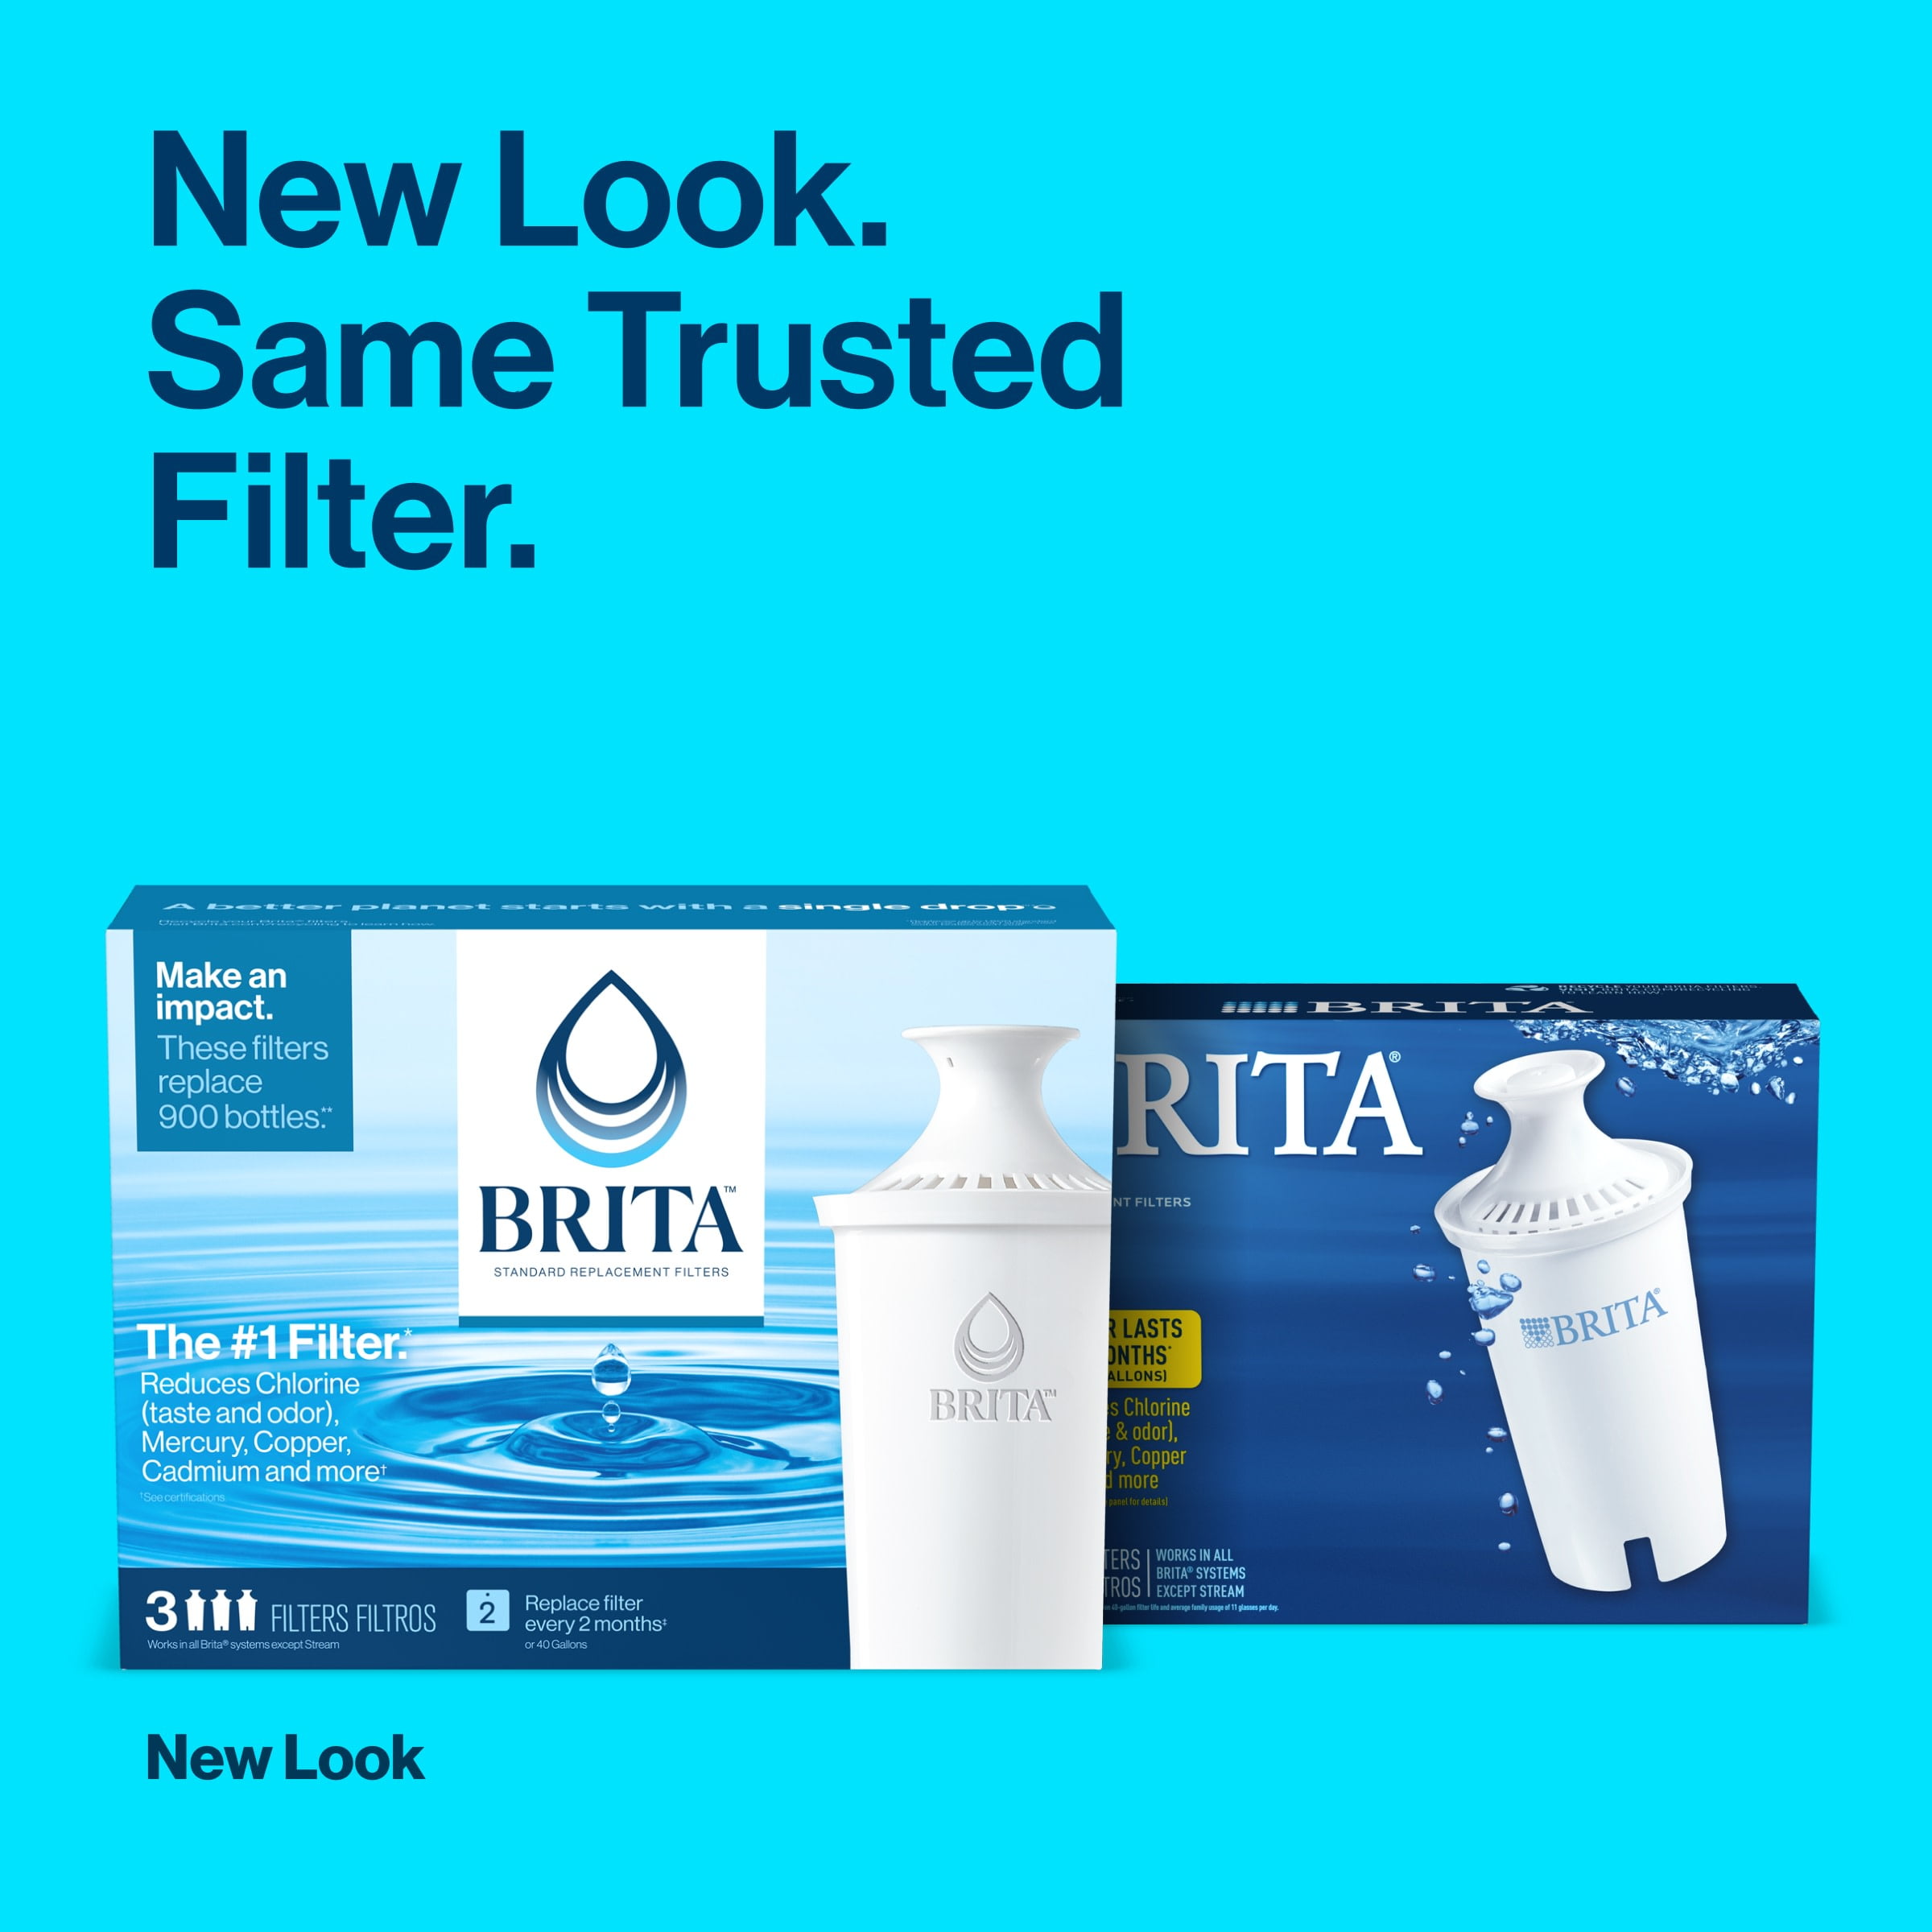 Brita Extra Large 27 Cup Filtered Water Dispenser with 1 Standard Filter,  Made without BPA, UltraMax, Mazarine Blue